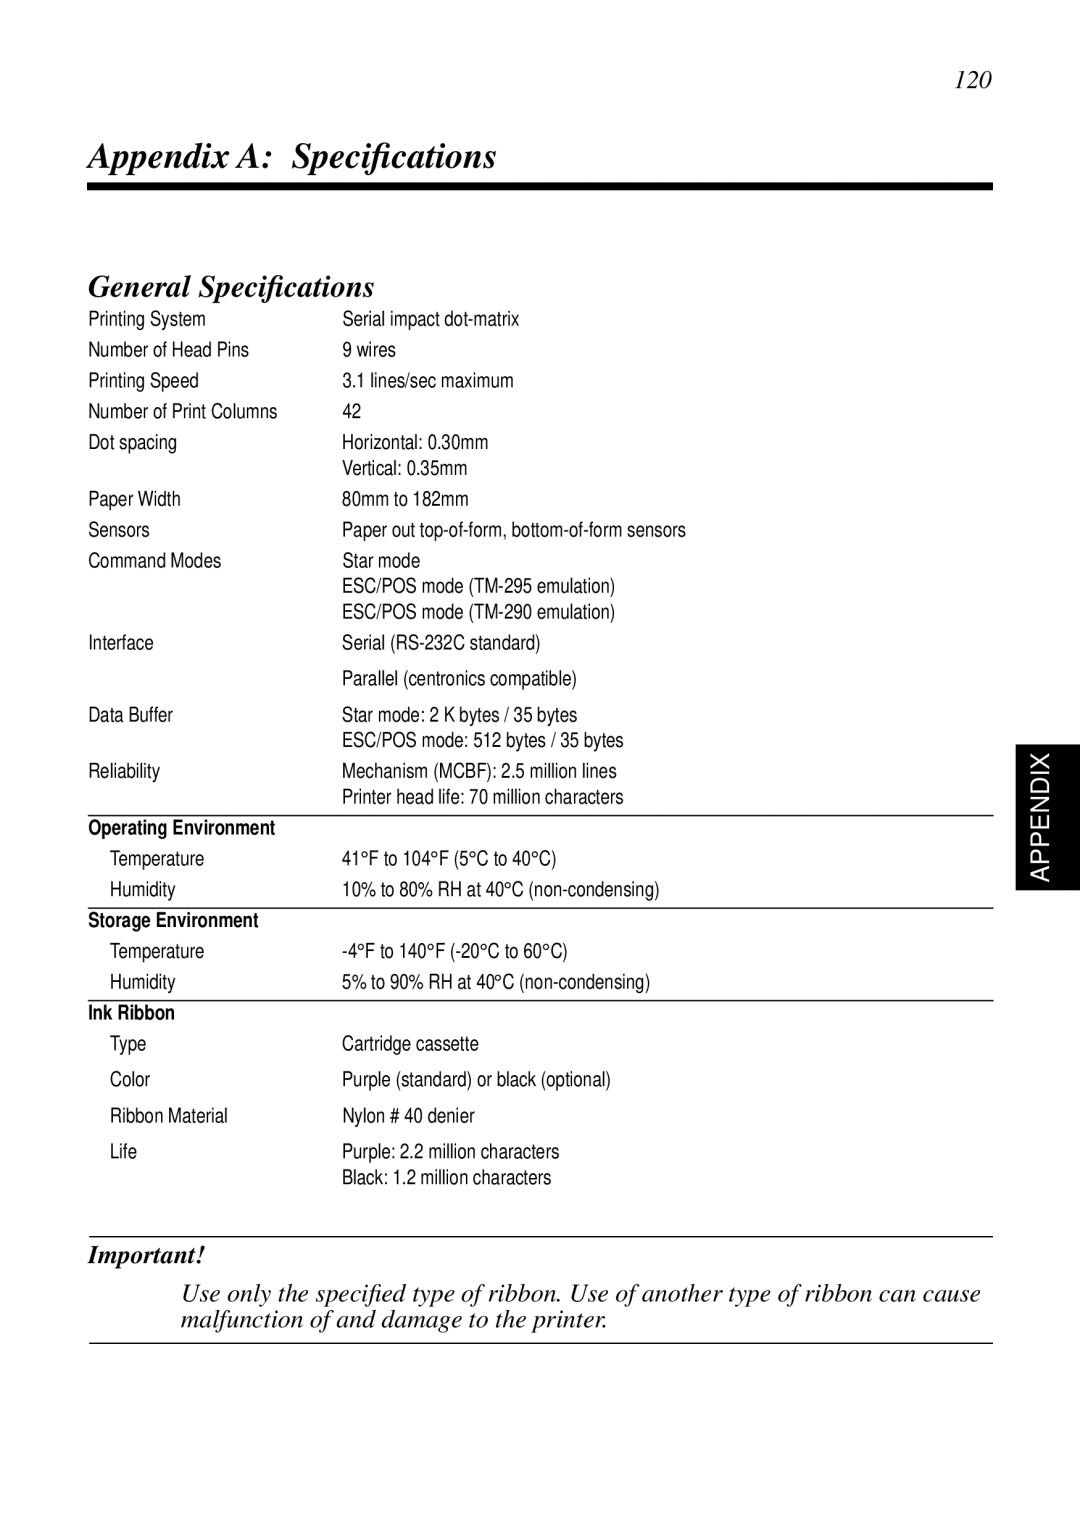 Star Micronics SP298 user manual Appendix A Speciﬁcations, General Speciﬁcations 